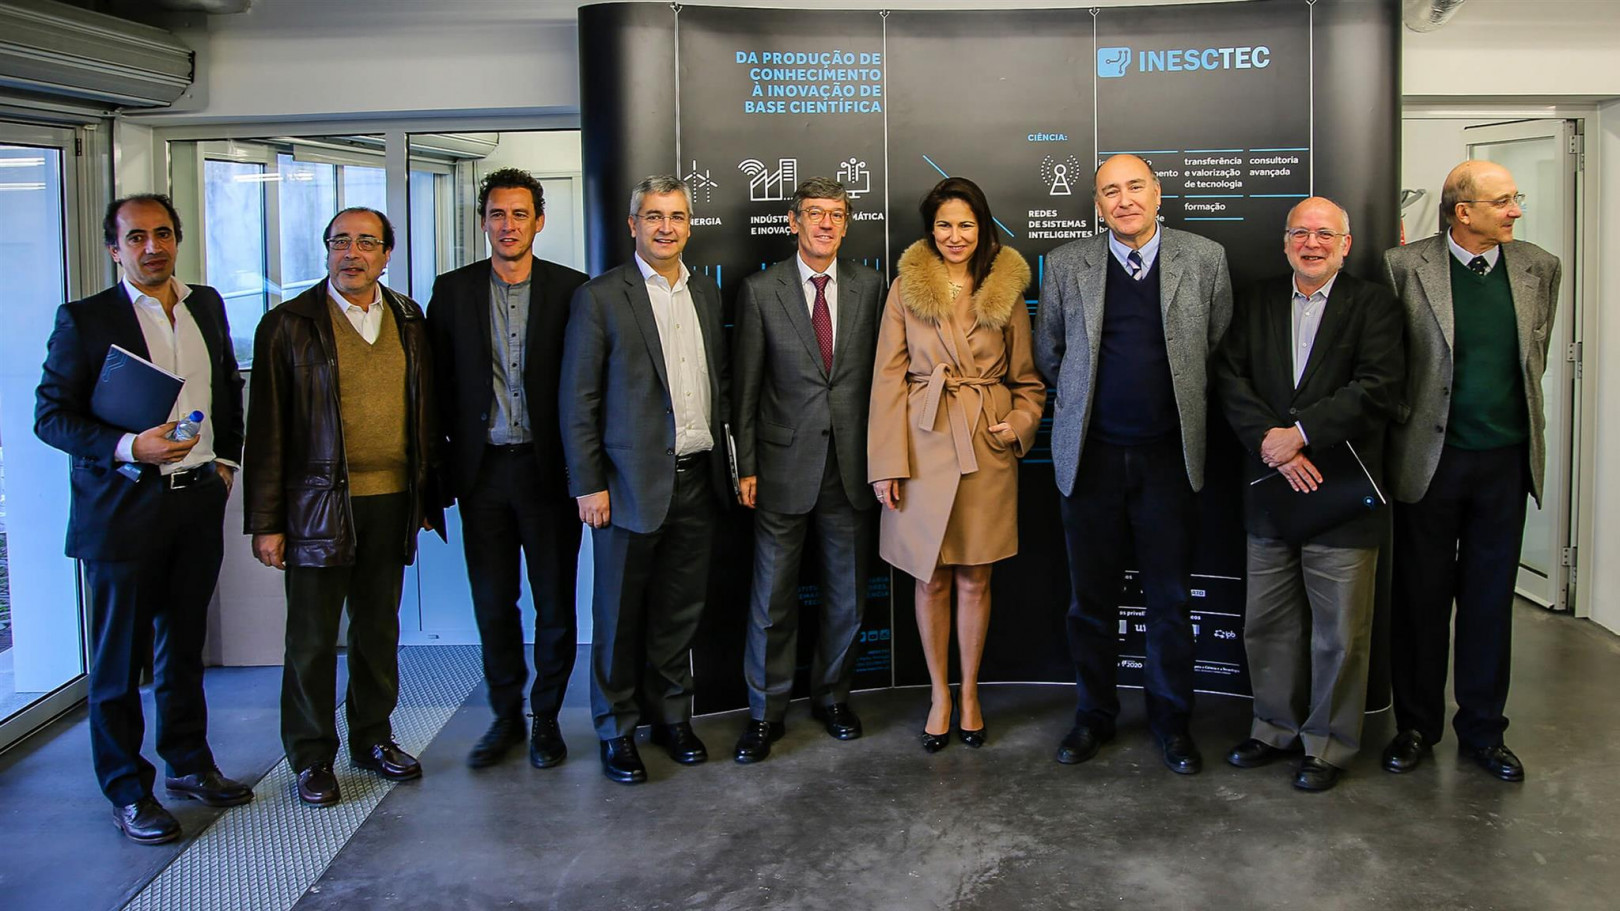 Secretary of State of Industry visits INESC TEC